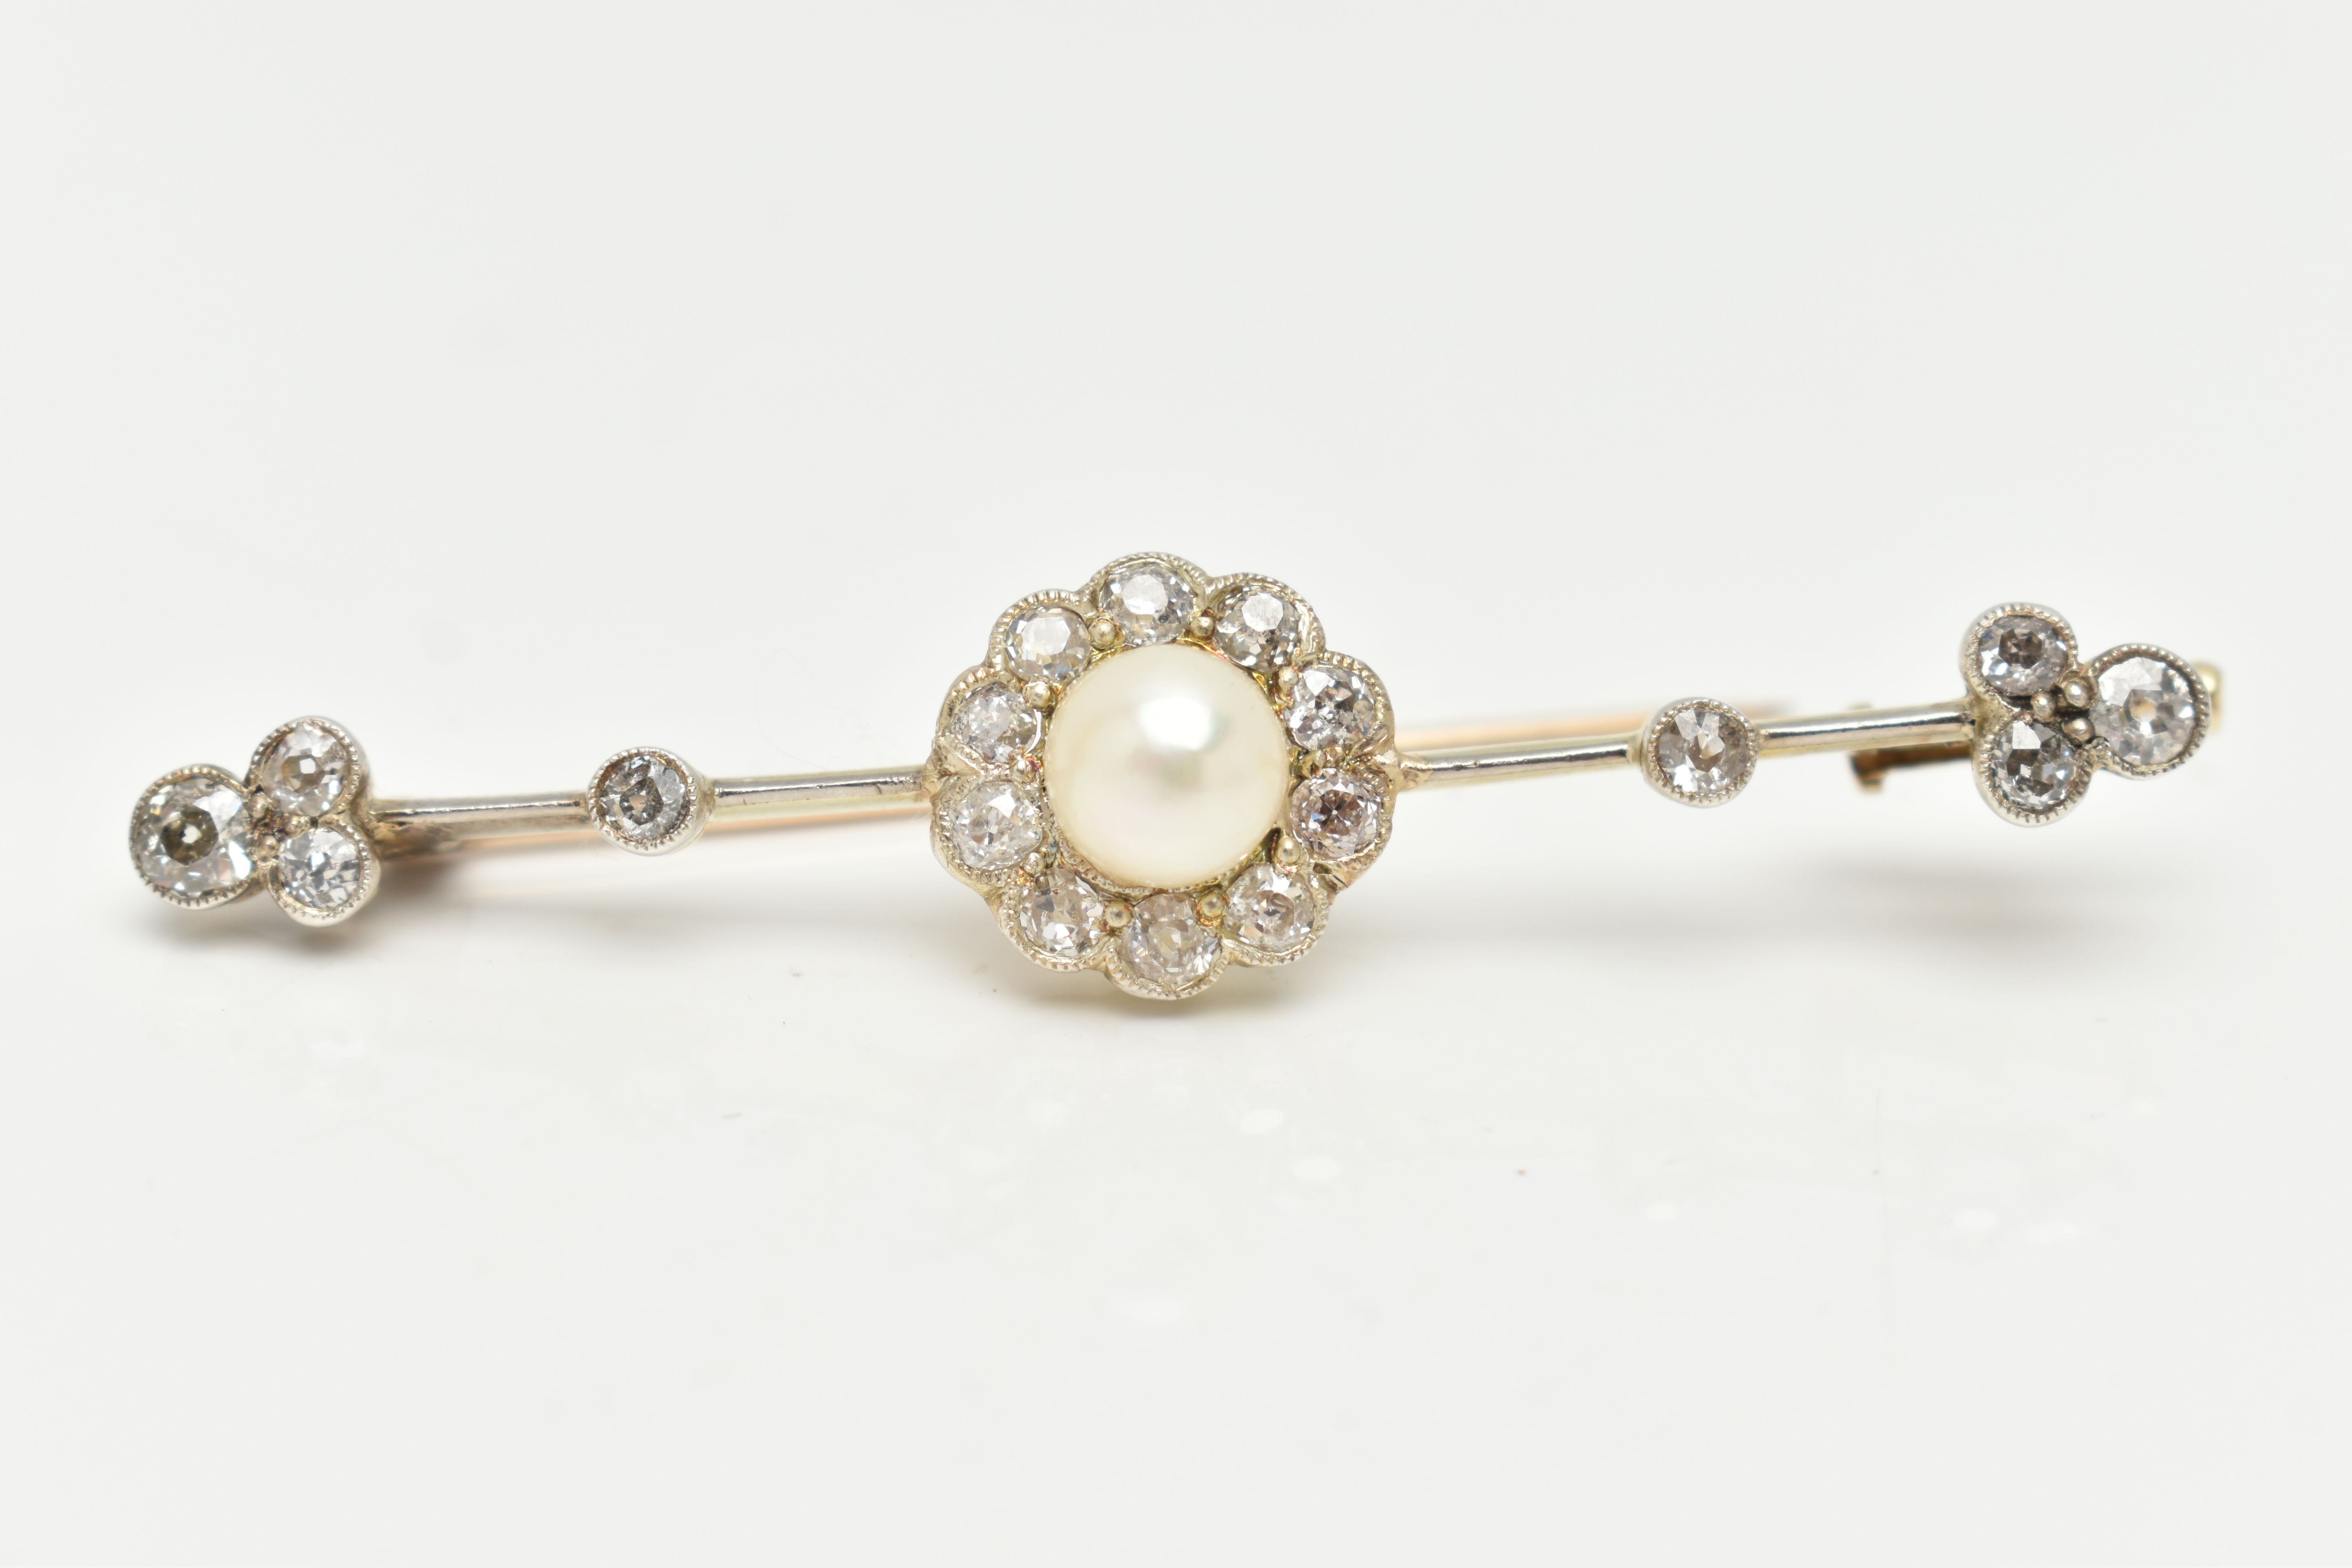 AN EARLY 20TH CENTURY, YELLOW AND WHITE METAL DIAMOND AND PEARL BAR BROOCH, centering on a single